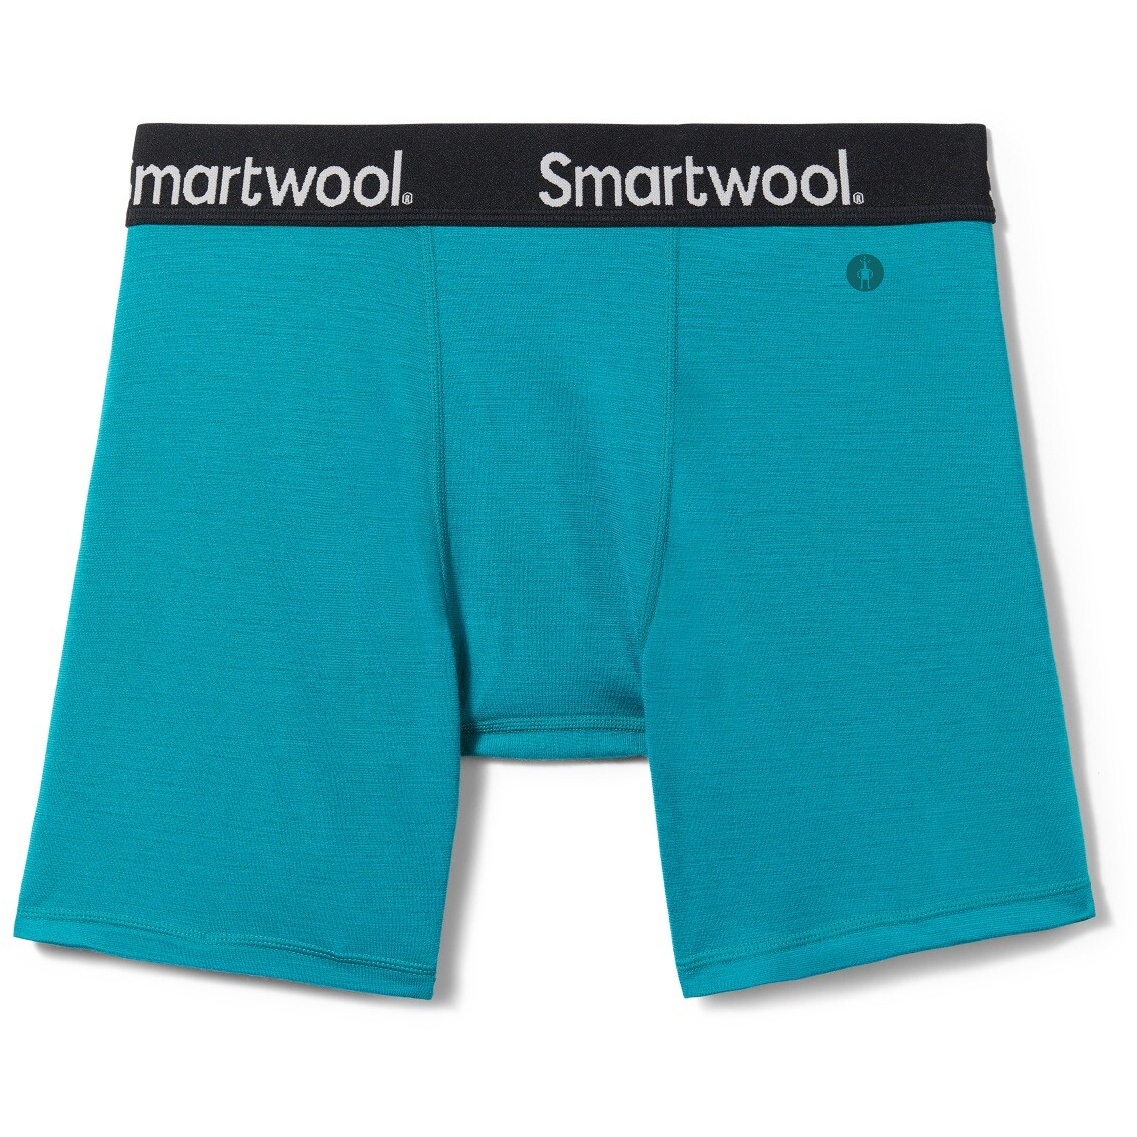 Picture of SmartWool Boxer Brief Boxed - L39 deep lake